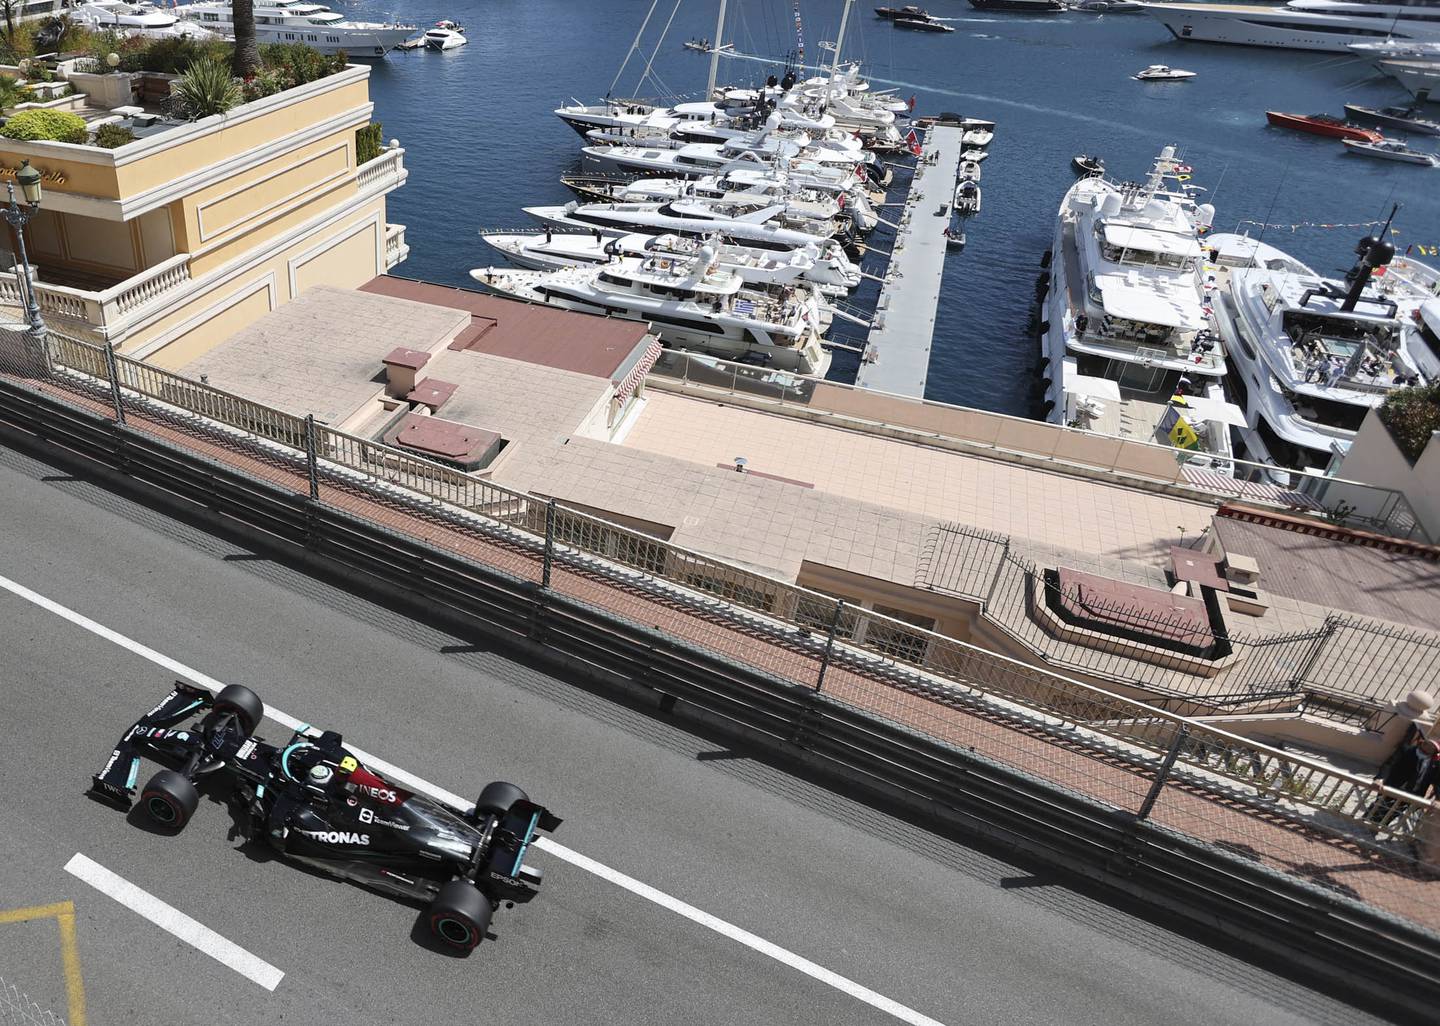 Mercedes’s Finnish driver Valtteri Bottas competes at the Monaco F1 Grand Prix on May 23, 2021. The storied course runs through the heart of the city, while Miami’s race is held 20 miles outside of town.  
dfd